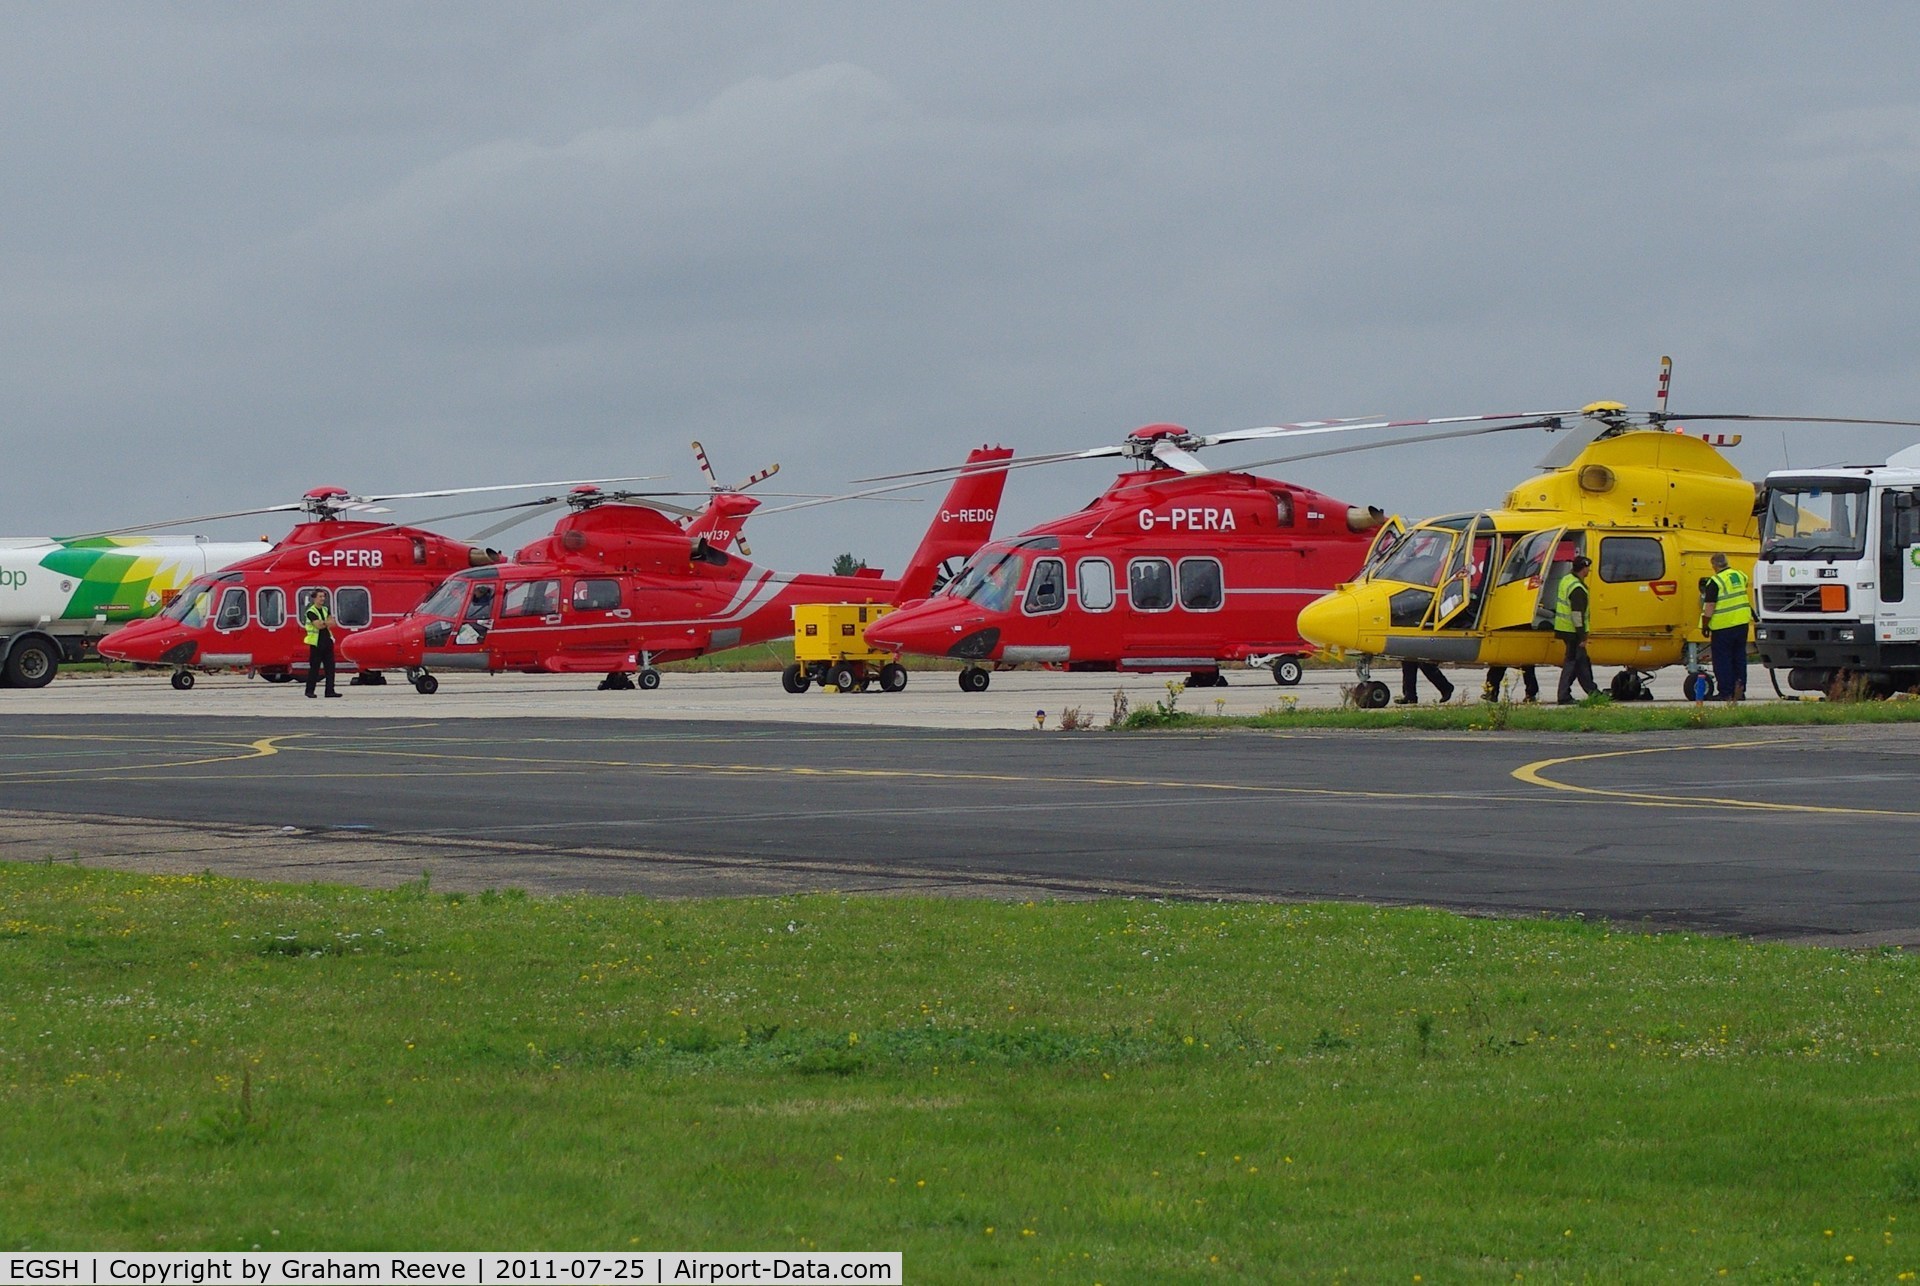 Norwich International Airport, Norwich, England United Kingdom (EGSH) - A line up of Bond and NHL helicopters.